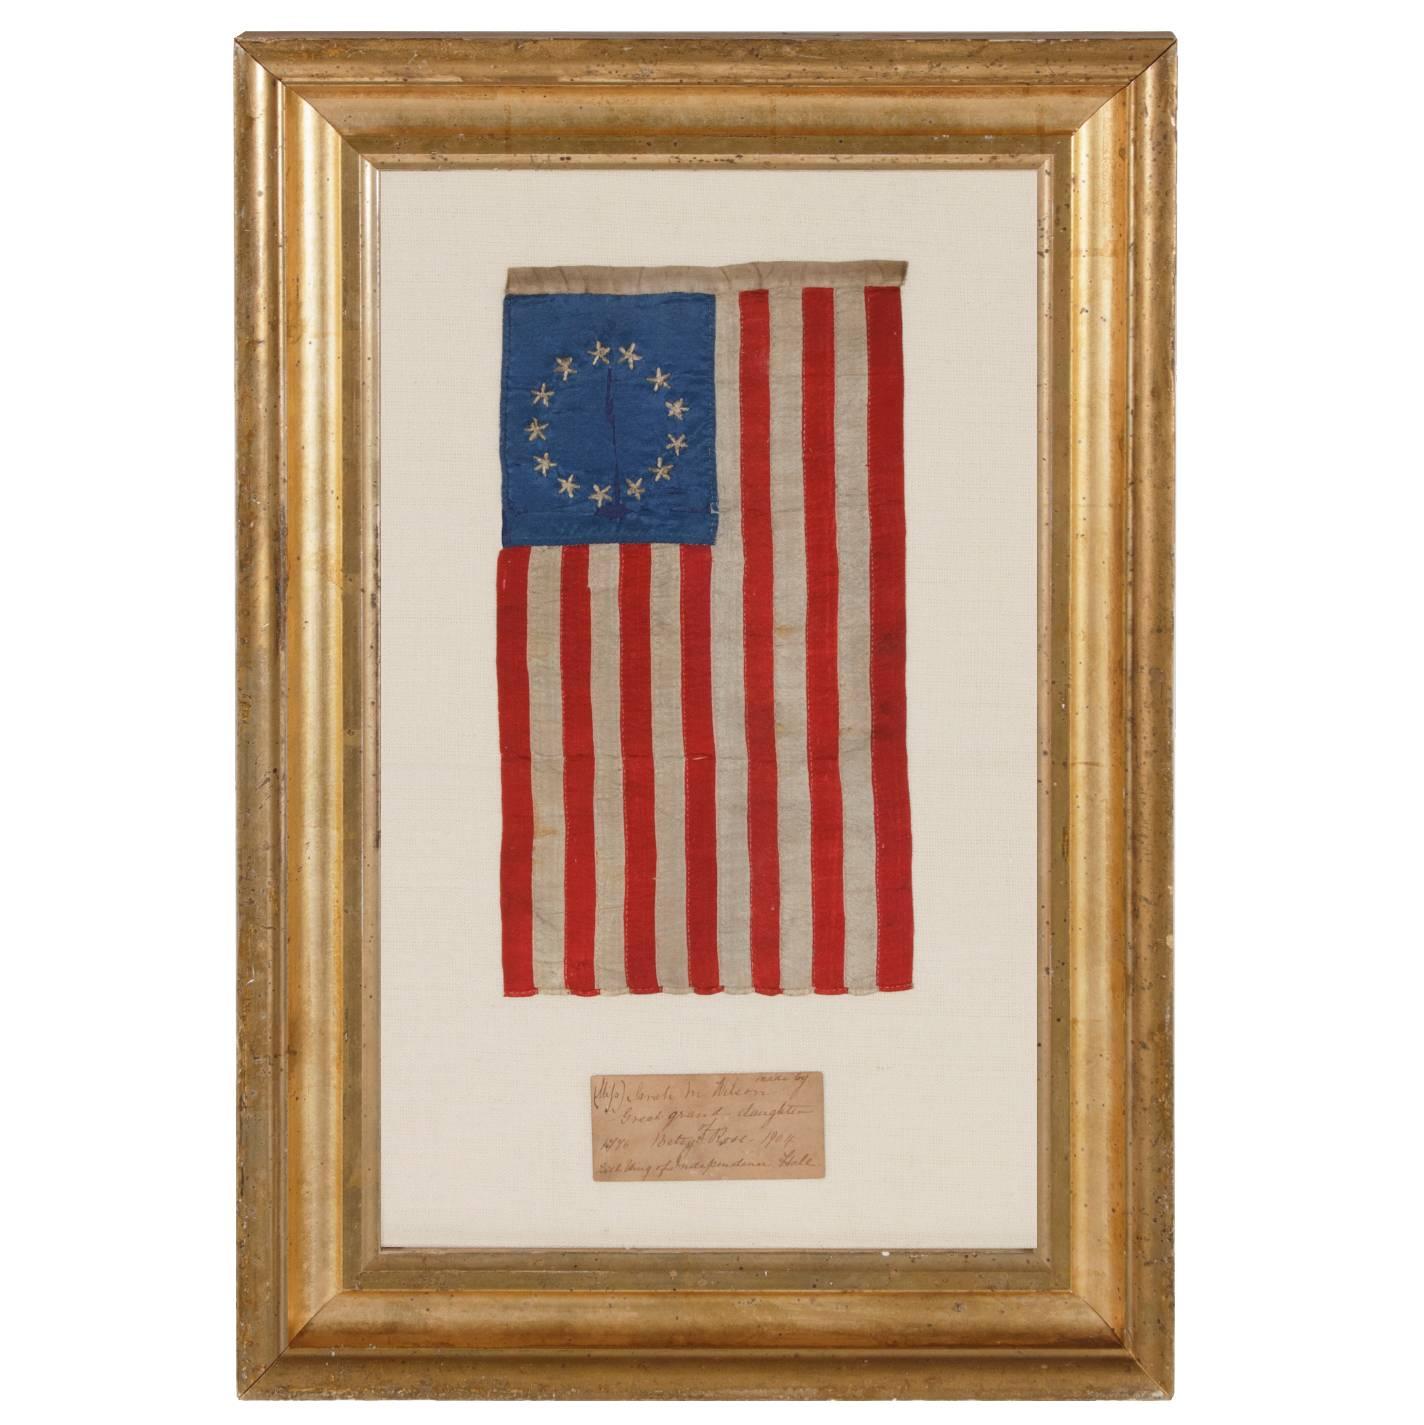 13 Star Flag Made by Sarah M. Wilson, Great-Granddaughter of Betsy Ross